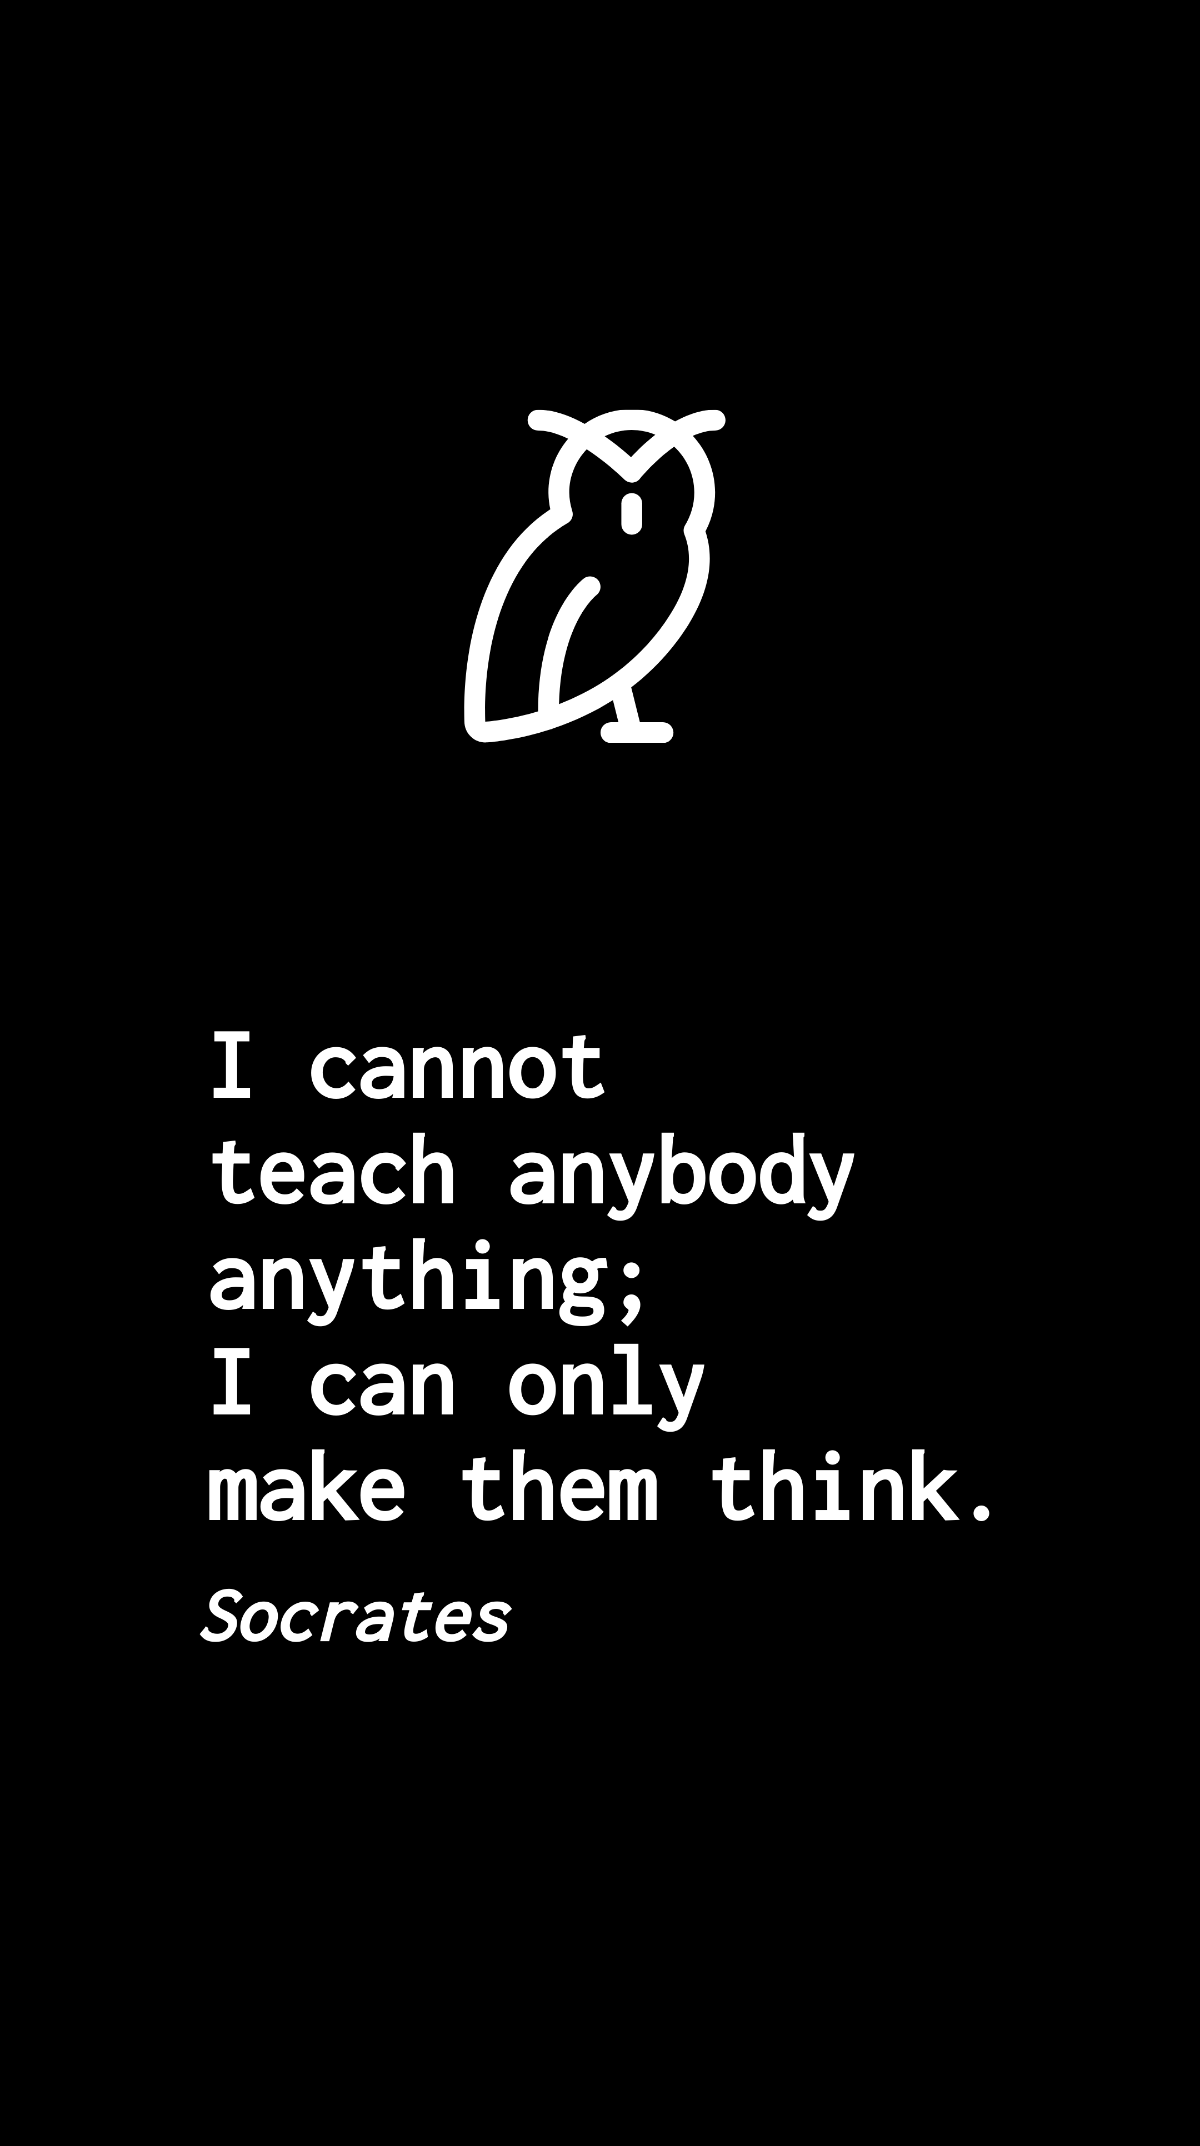 Socrates - I cannot teach anybody anything; I can only make them think.